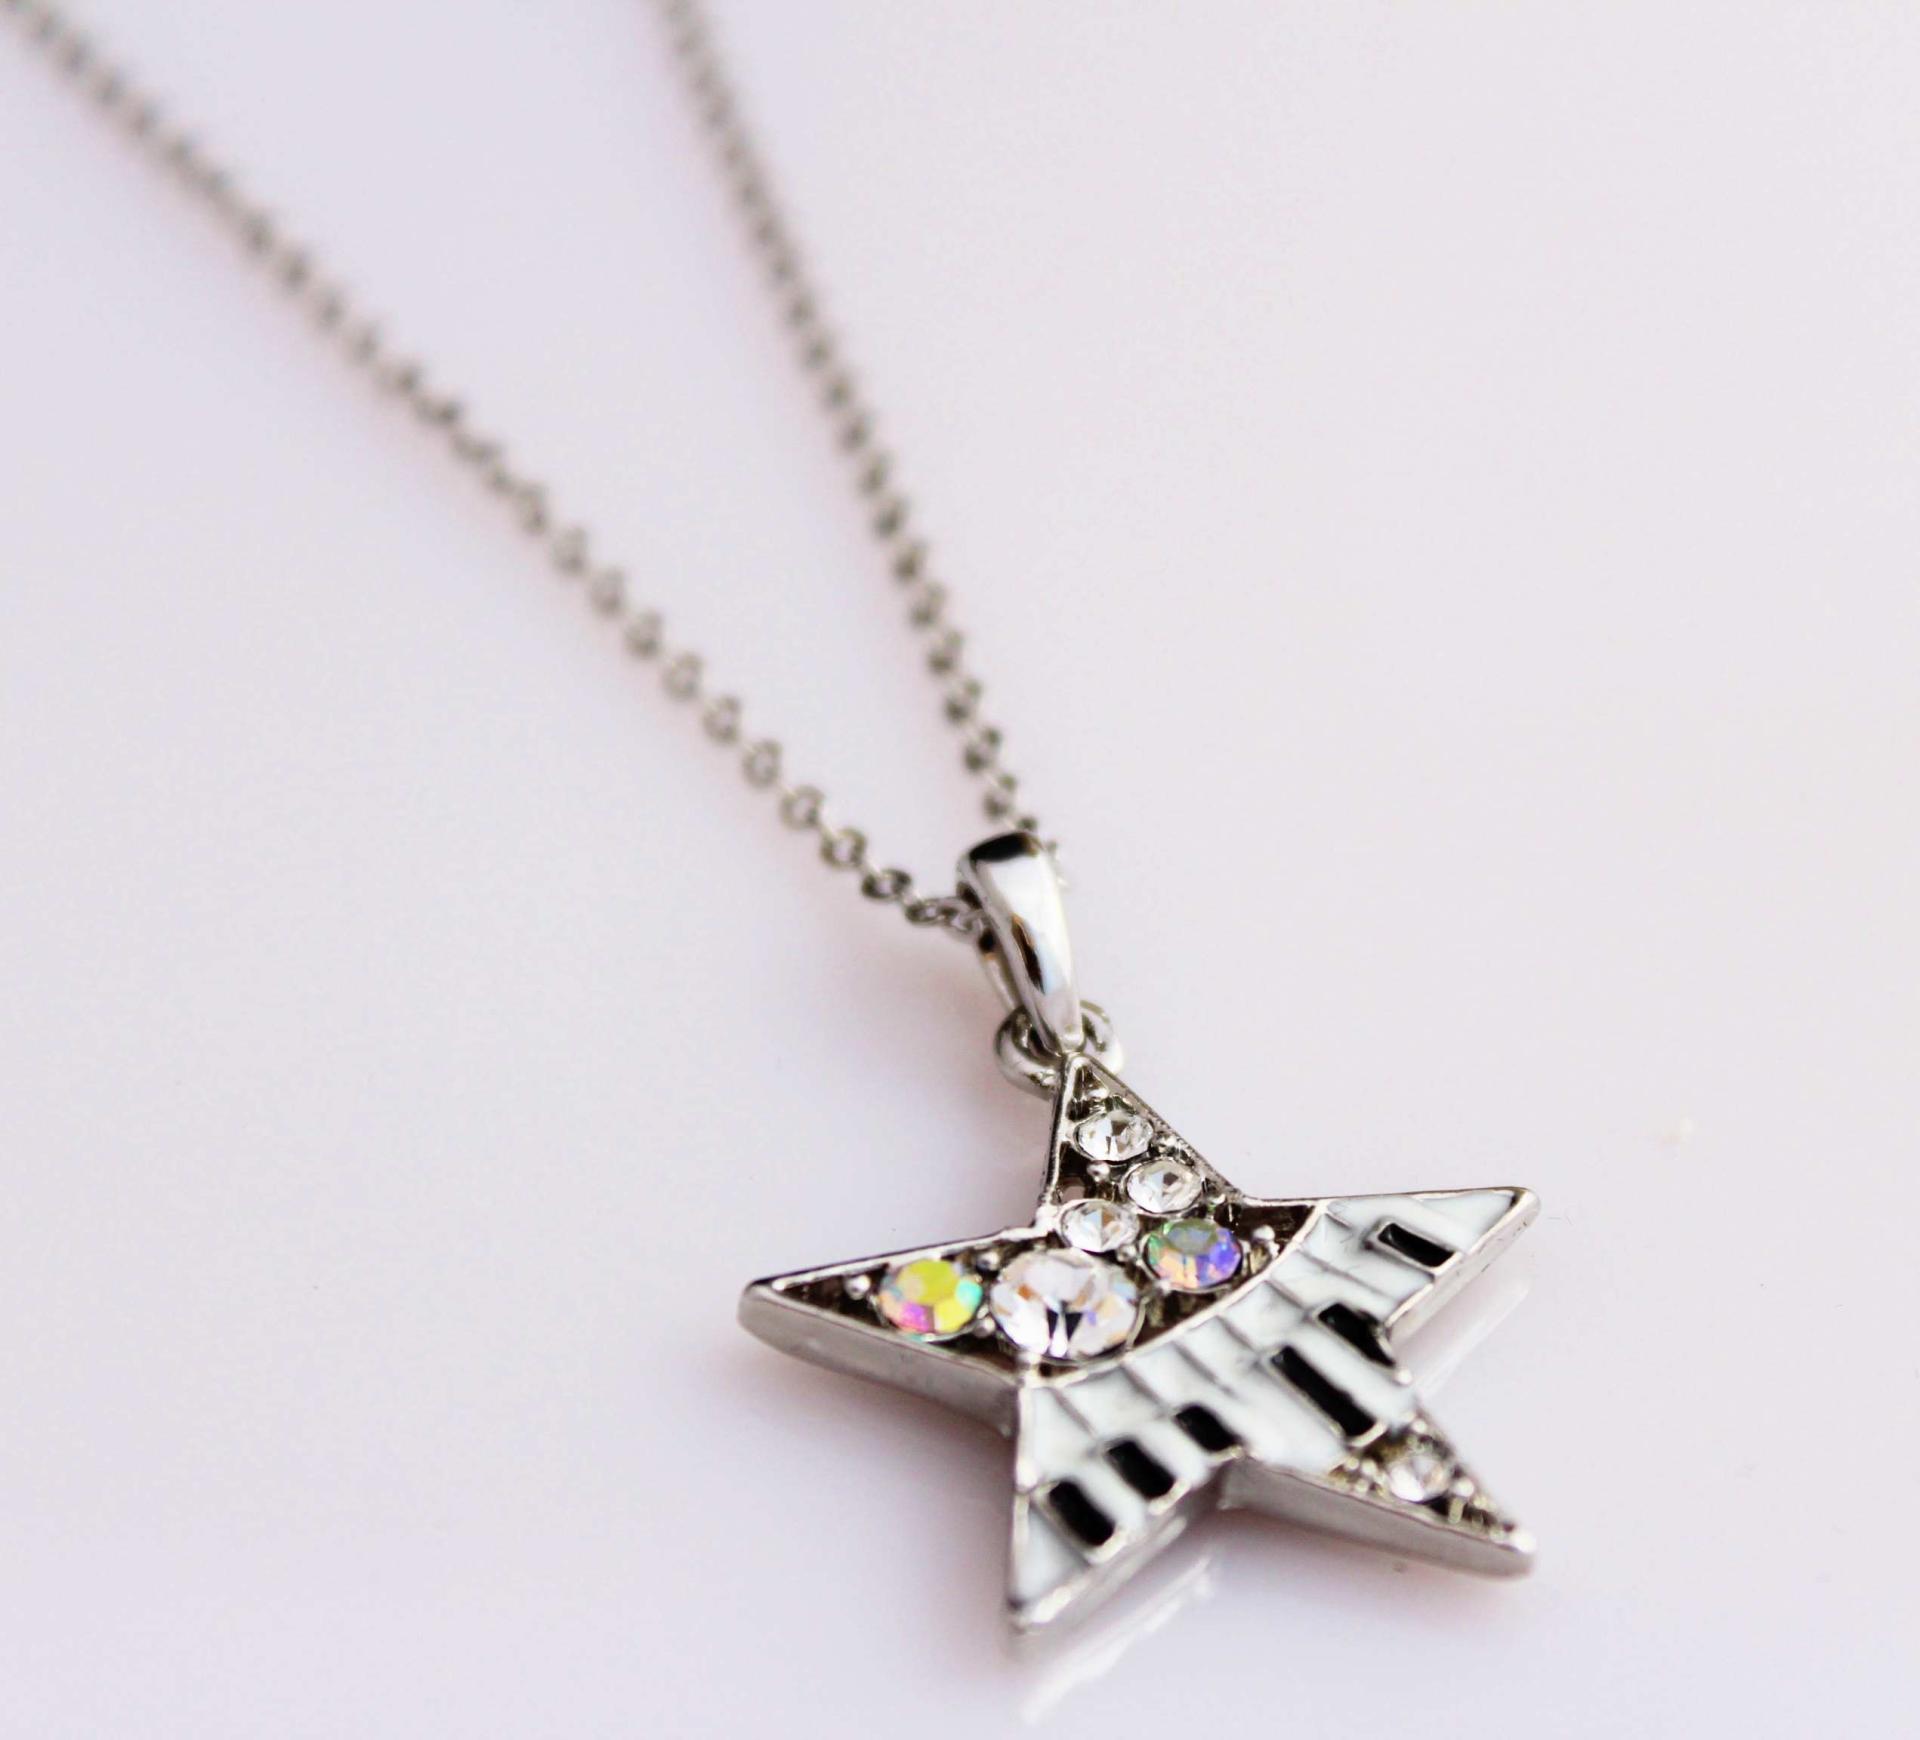 Keyboard & Star Music Necklace